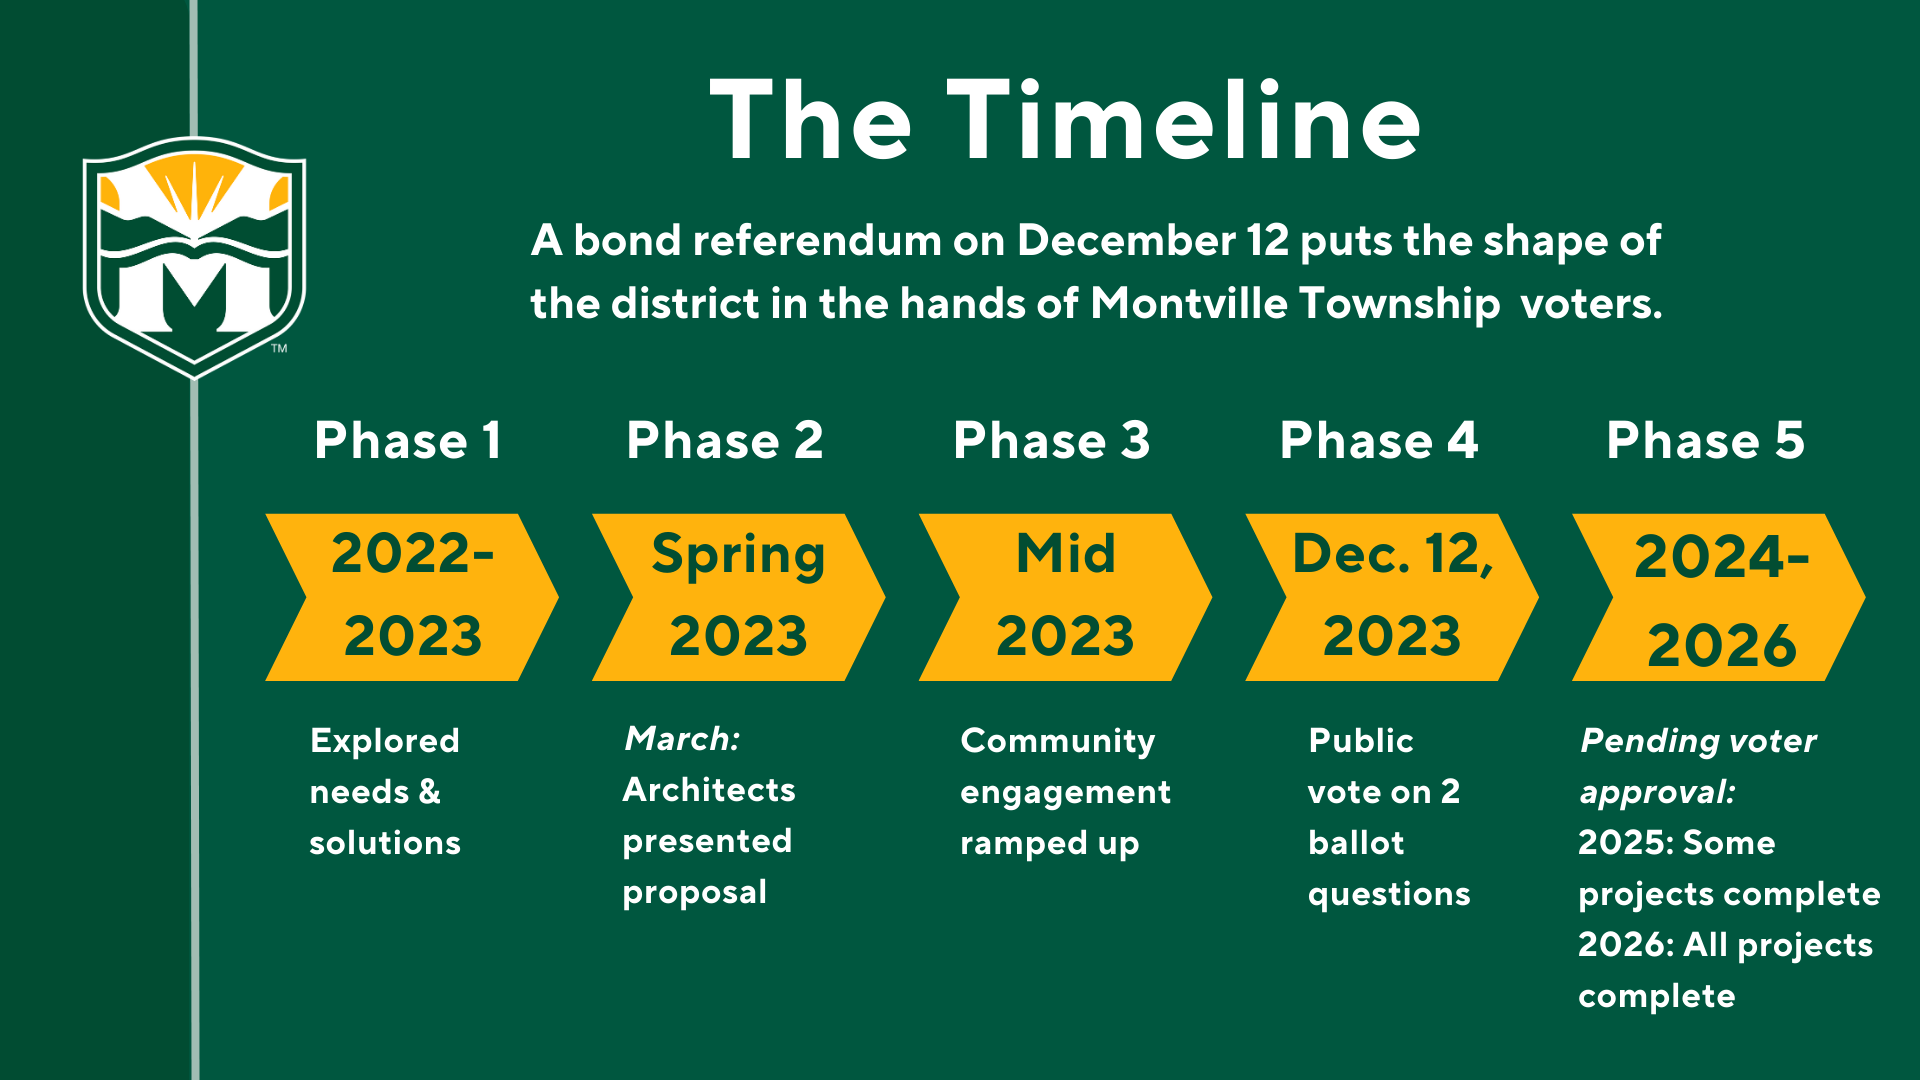 The timeline for the referendum:  The Timeline, A bond Referendum on December 12 puts the shape of the district in the hands of Montville Township voters. Phase 1 2022-2023 Explored needs & solutions, Phase 2 Spring 2023 March: Architects presented proposal. Phase 3 Mid 2023 Comunity engagement ramped up. Phase 4 Dec 12, 2023 Publie vote of 2 ballot questions. Phase 5 2024-2026 Pending voter approval: 2025: some projects complete, 2026: All projects complete.